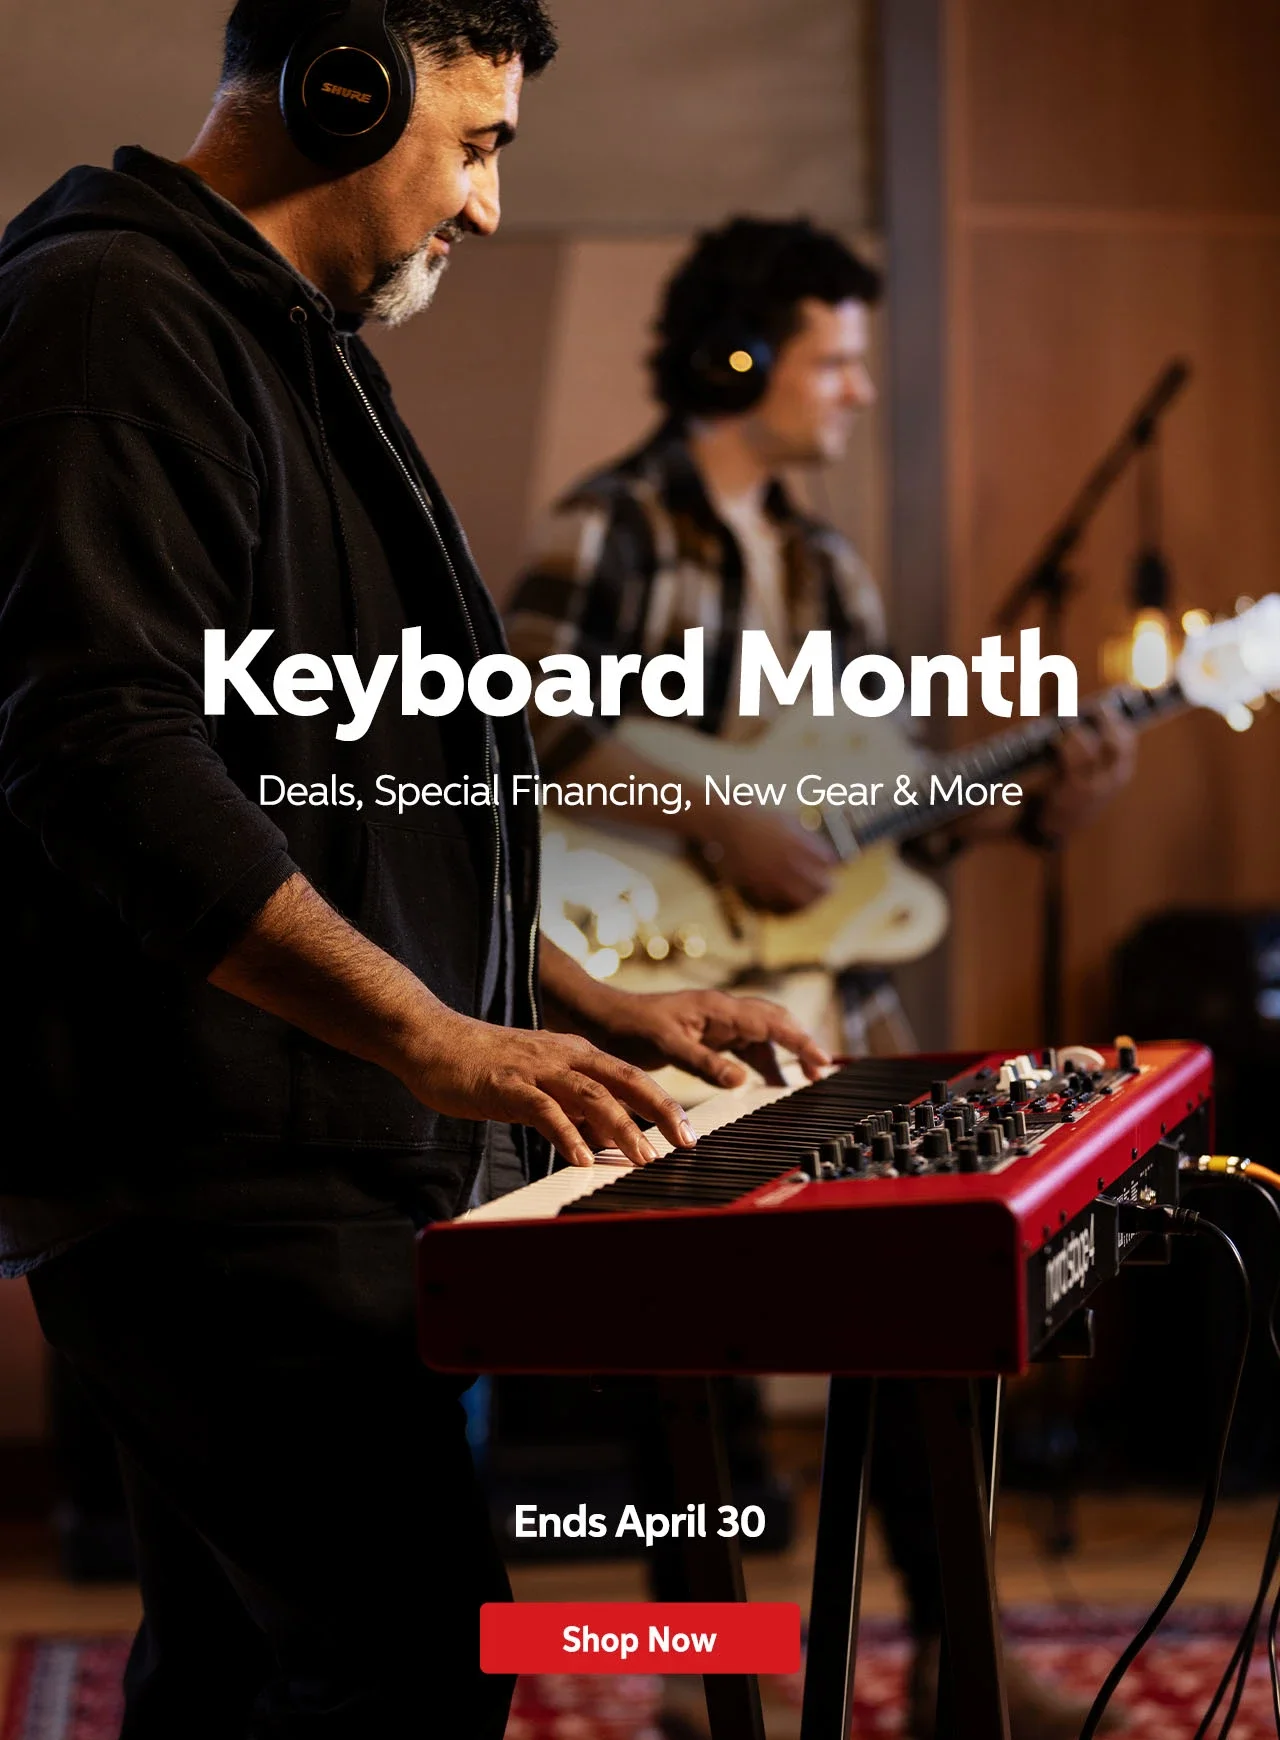 Keyboard Month: Deals, special financing, new gear & more. Ends April 30. Shop now.